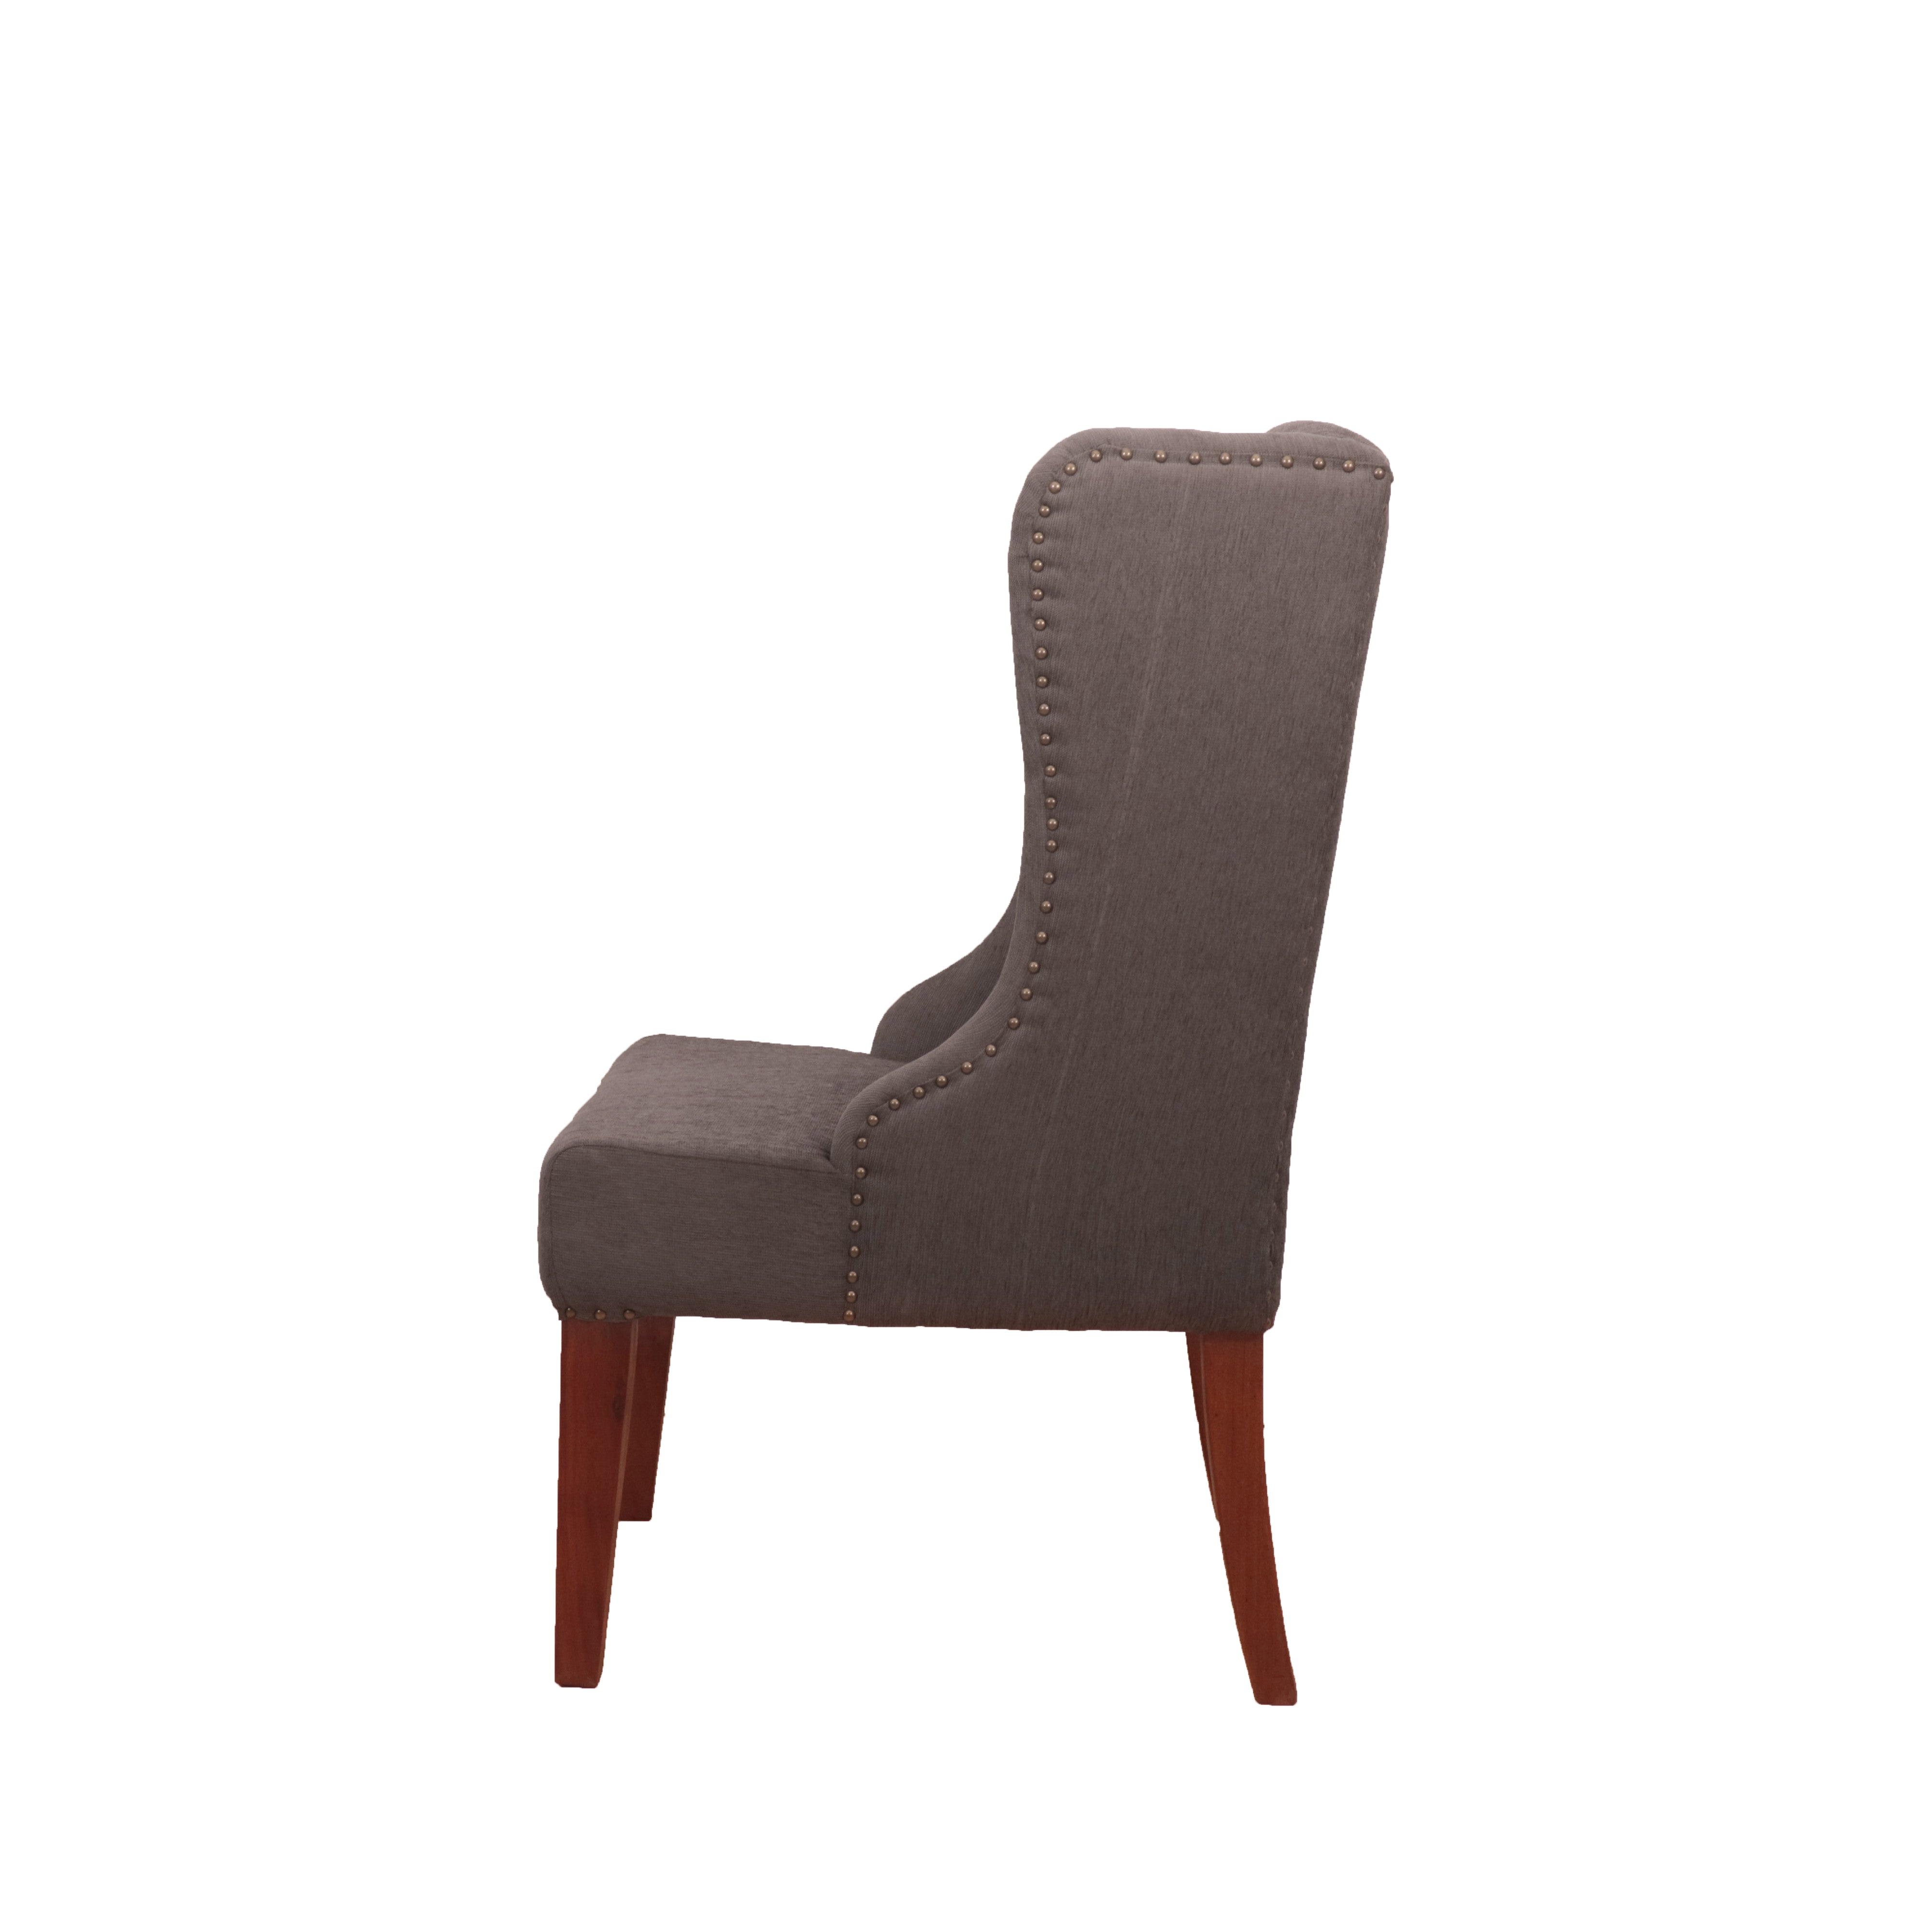 Grey Classic Winged Chair Arm Chair